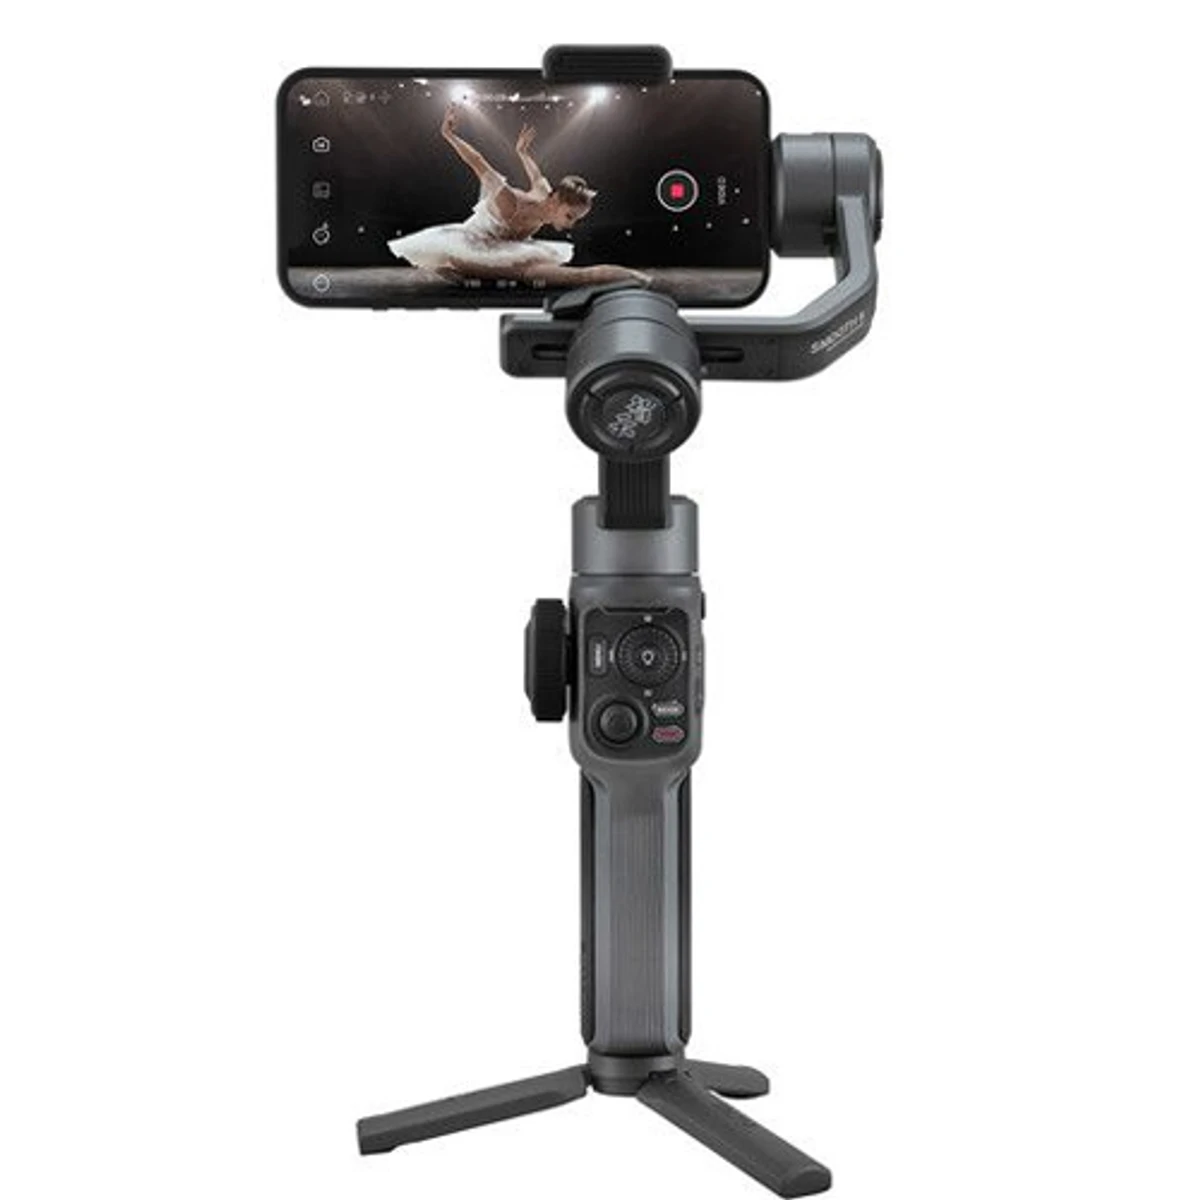 Zhiyun Smooth 5 Gimbal Stabilizer, 3-Axis Handheld Smartphone Gimbal With Grip Tripod Vlog LED Fill Light For IPhone Or Android